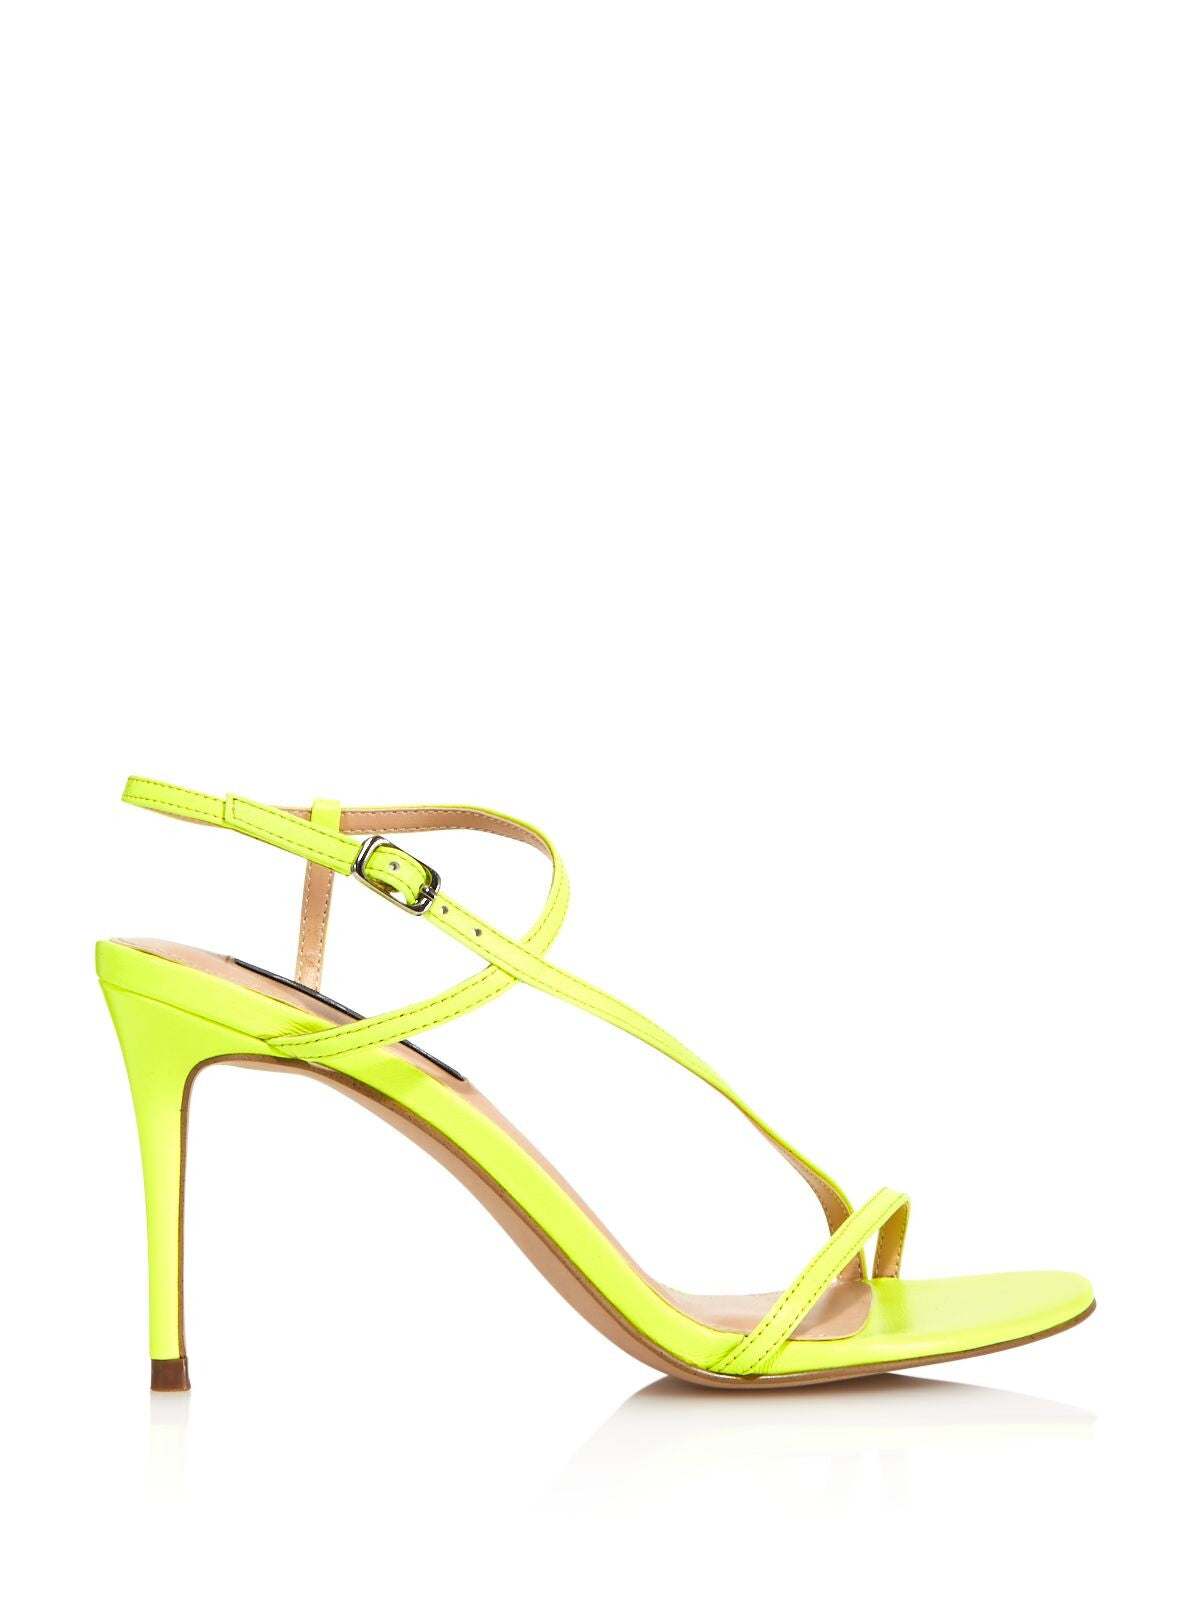 AQUA Womens Yellow Strappy Padded Ron Round Toe Stiletto Buckle Leather Slingback Sandal 7.5 M